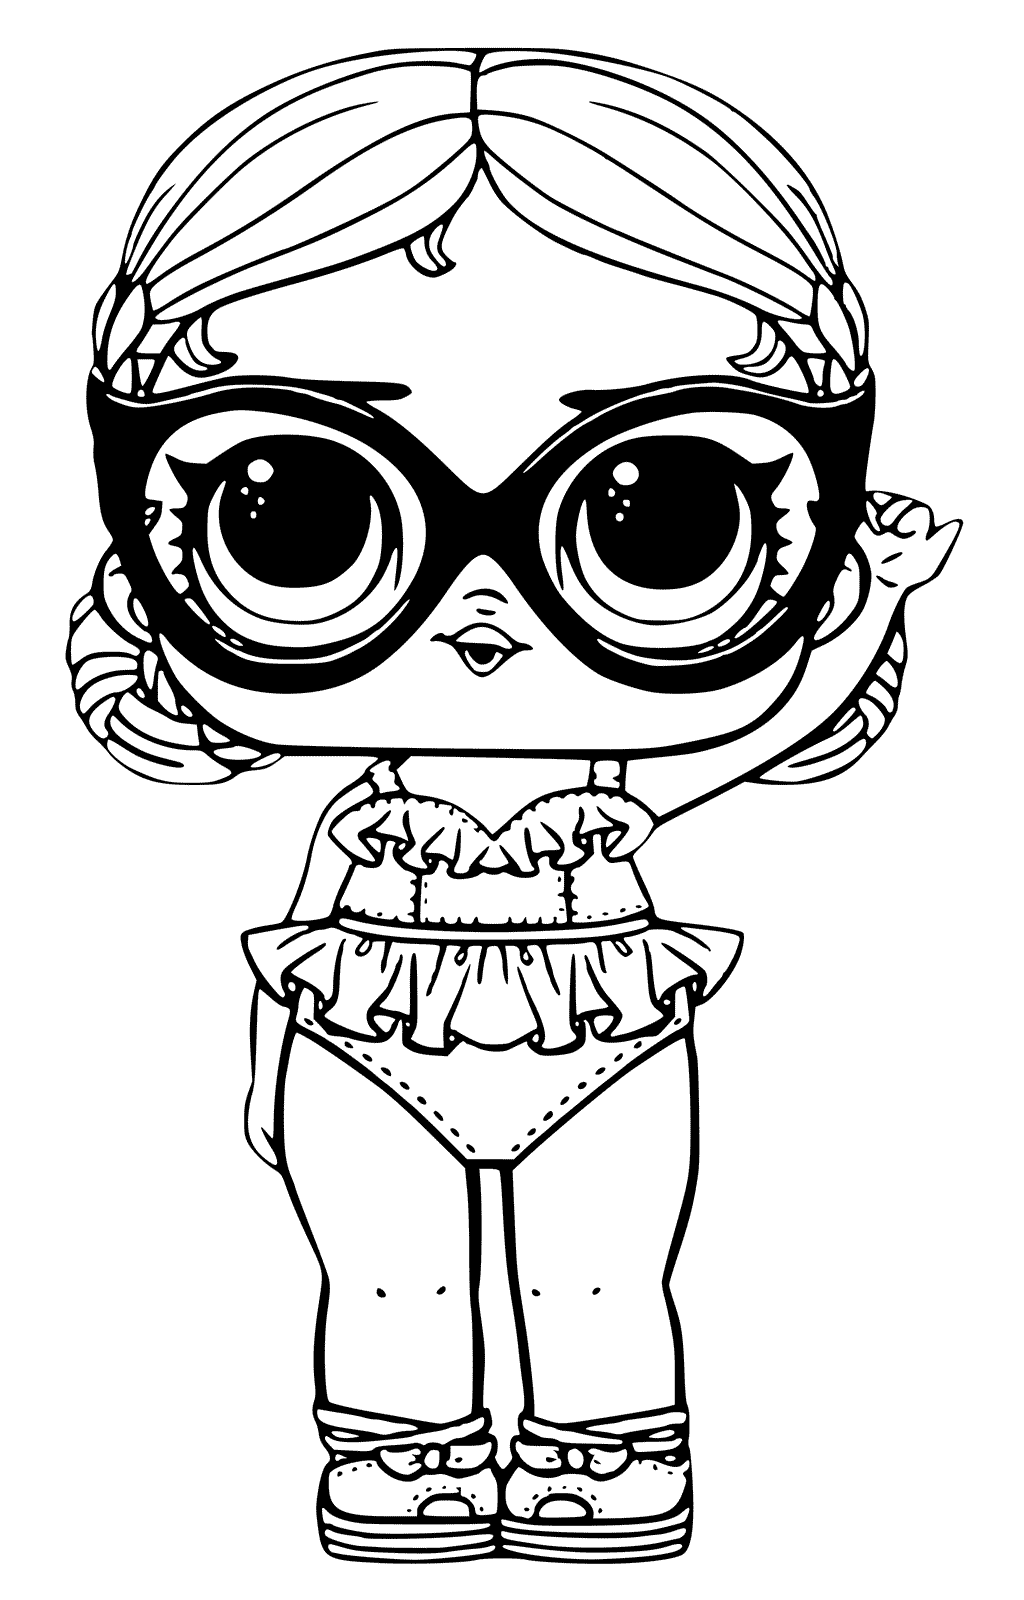 Lol Dolls Coloring Pages Best Coloring Pages For Kids You can find here 42 free printable coloring pages of lol surprise winter disco series dolls. lol dolls coloring pages best